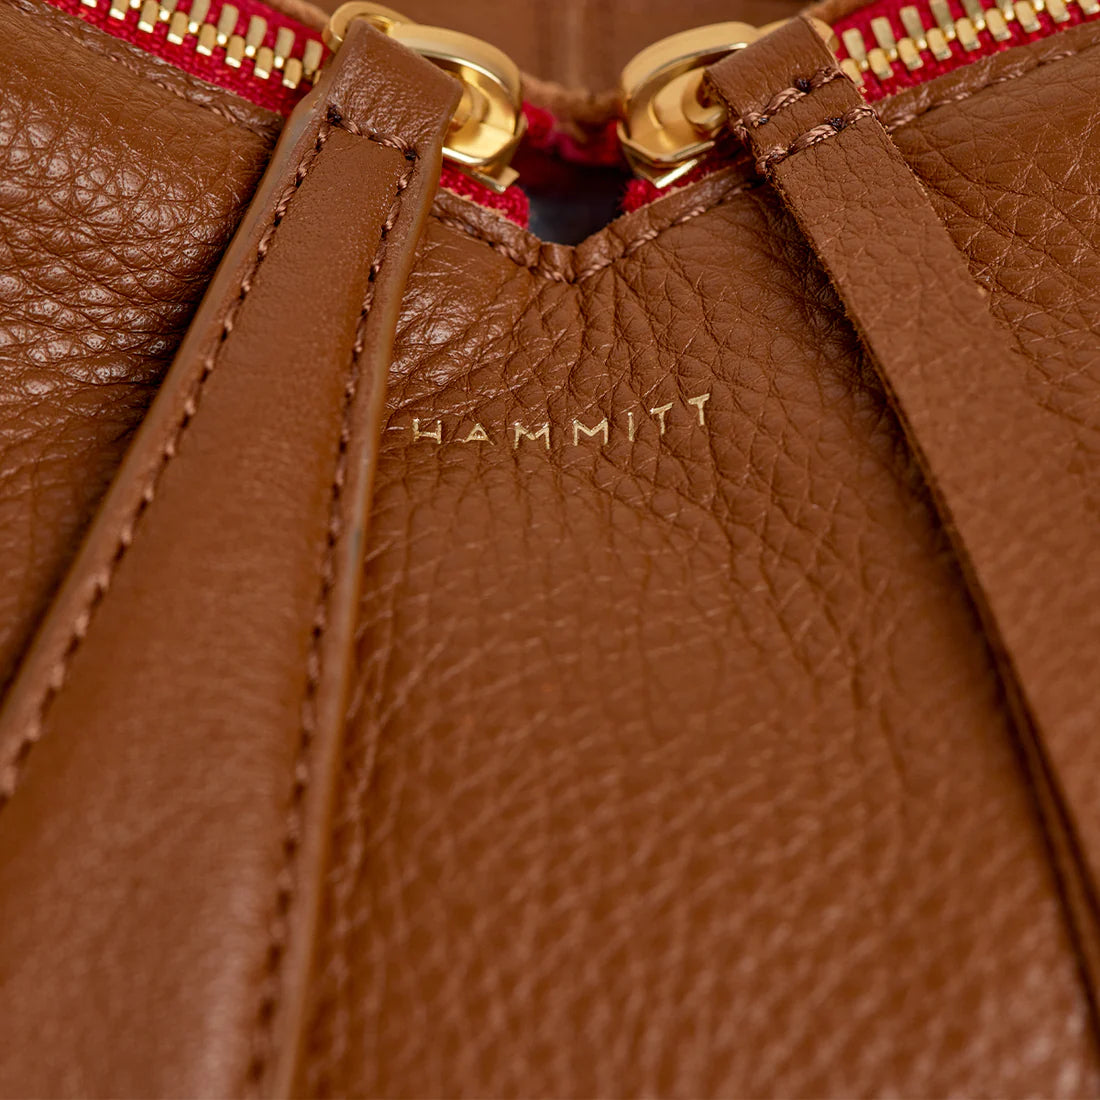 Mr. G - Mahogany Pebble / Brushed Gold Red Zip